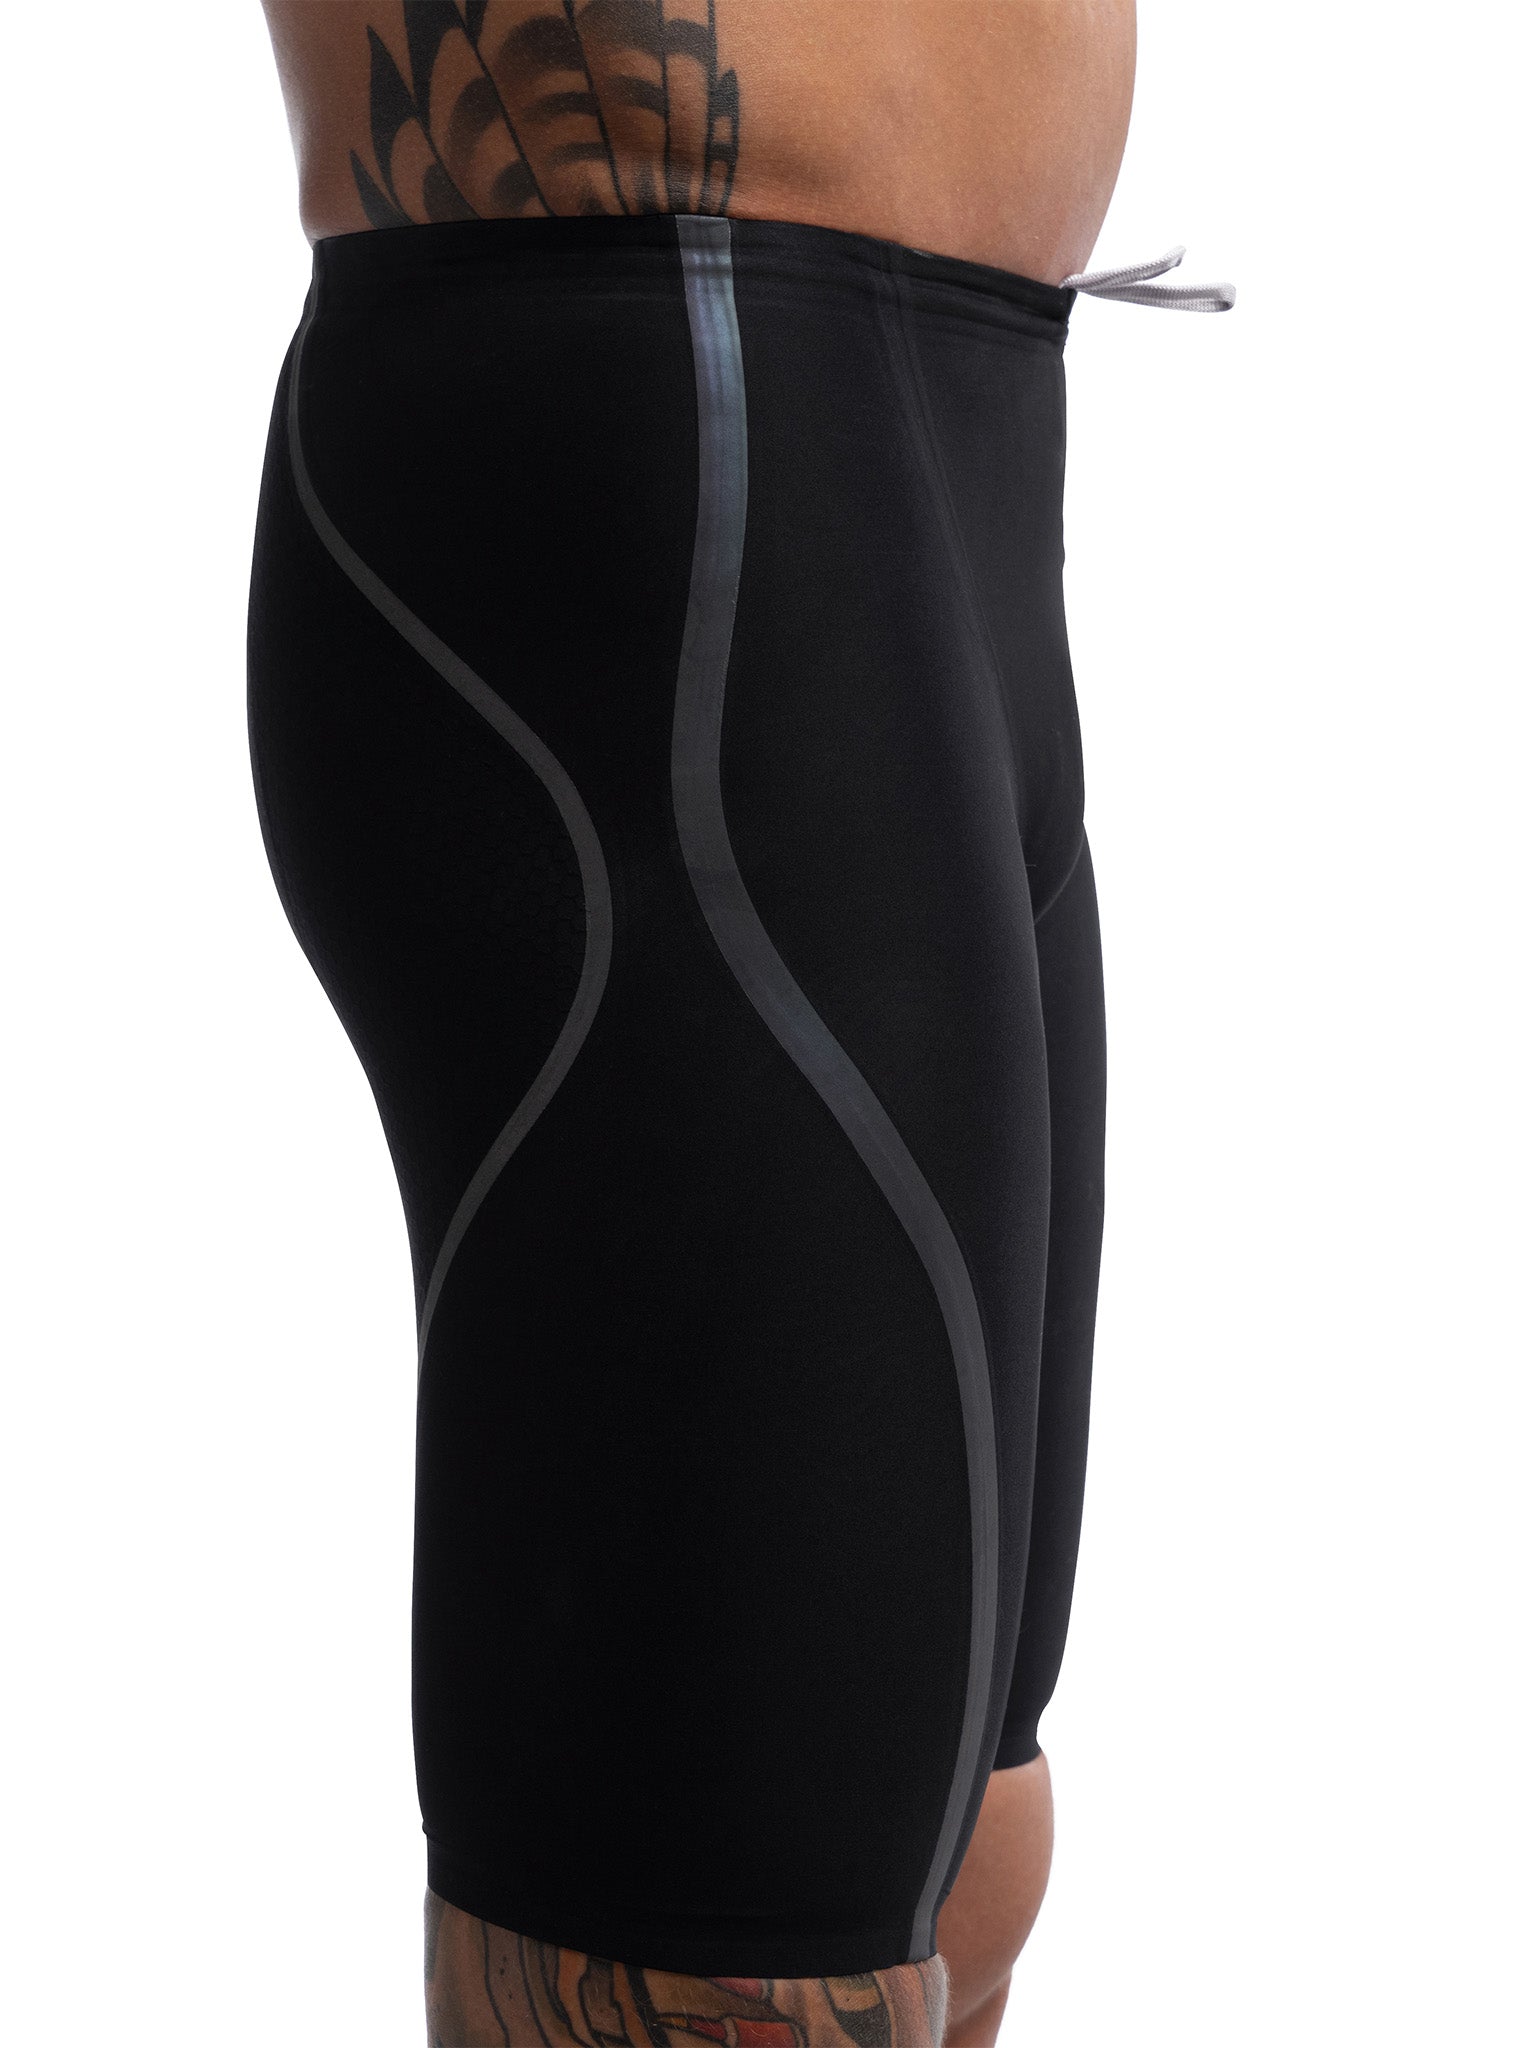 Cuissard Homme Fastskin LZR Pure Intent 2.0 - Taille Haute